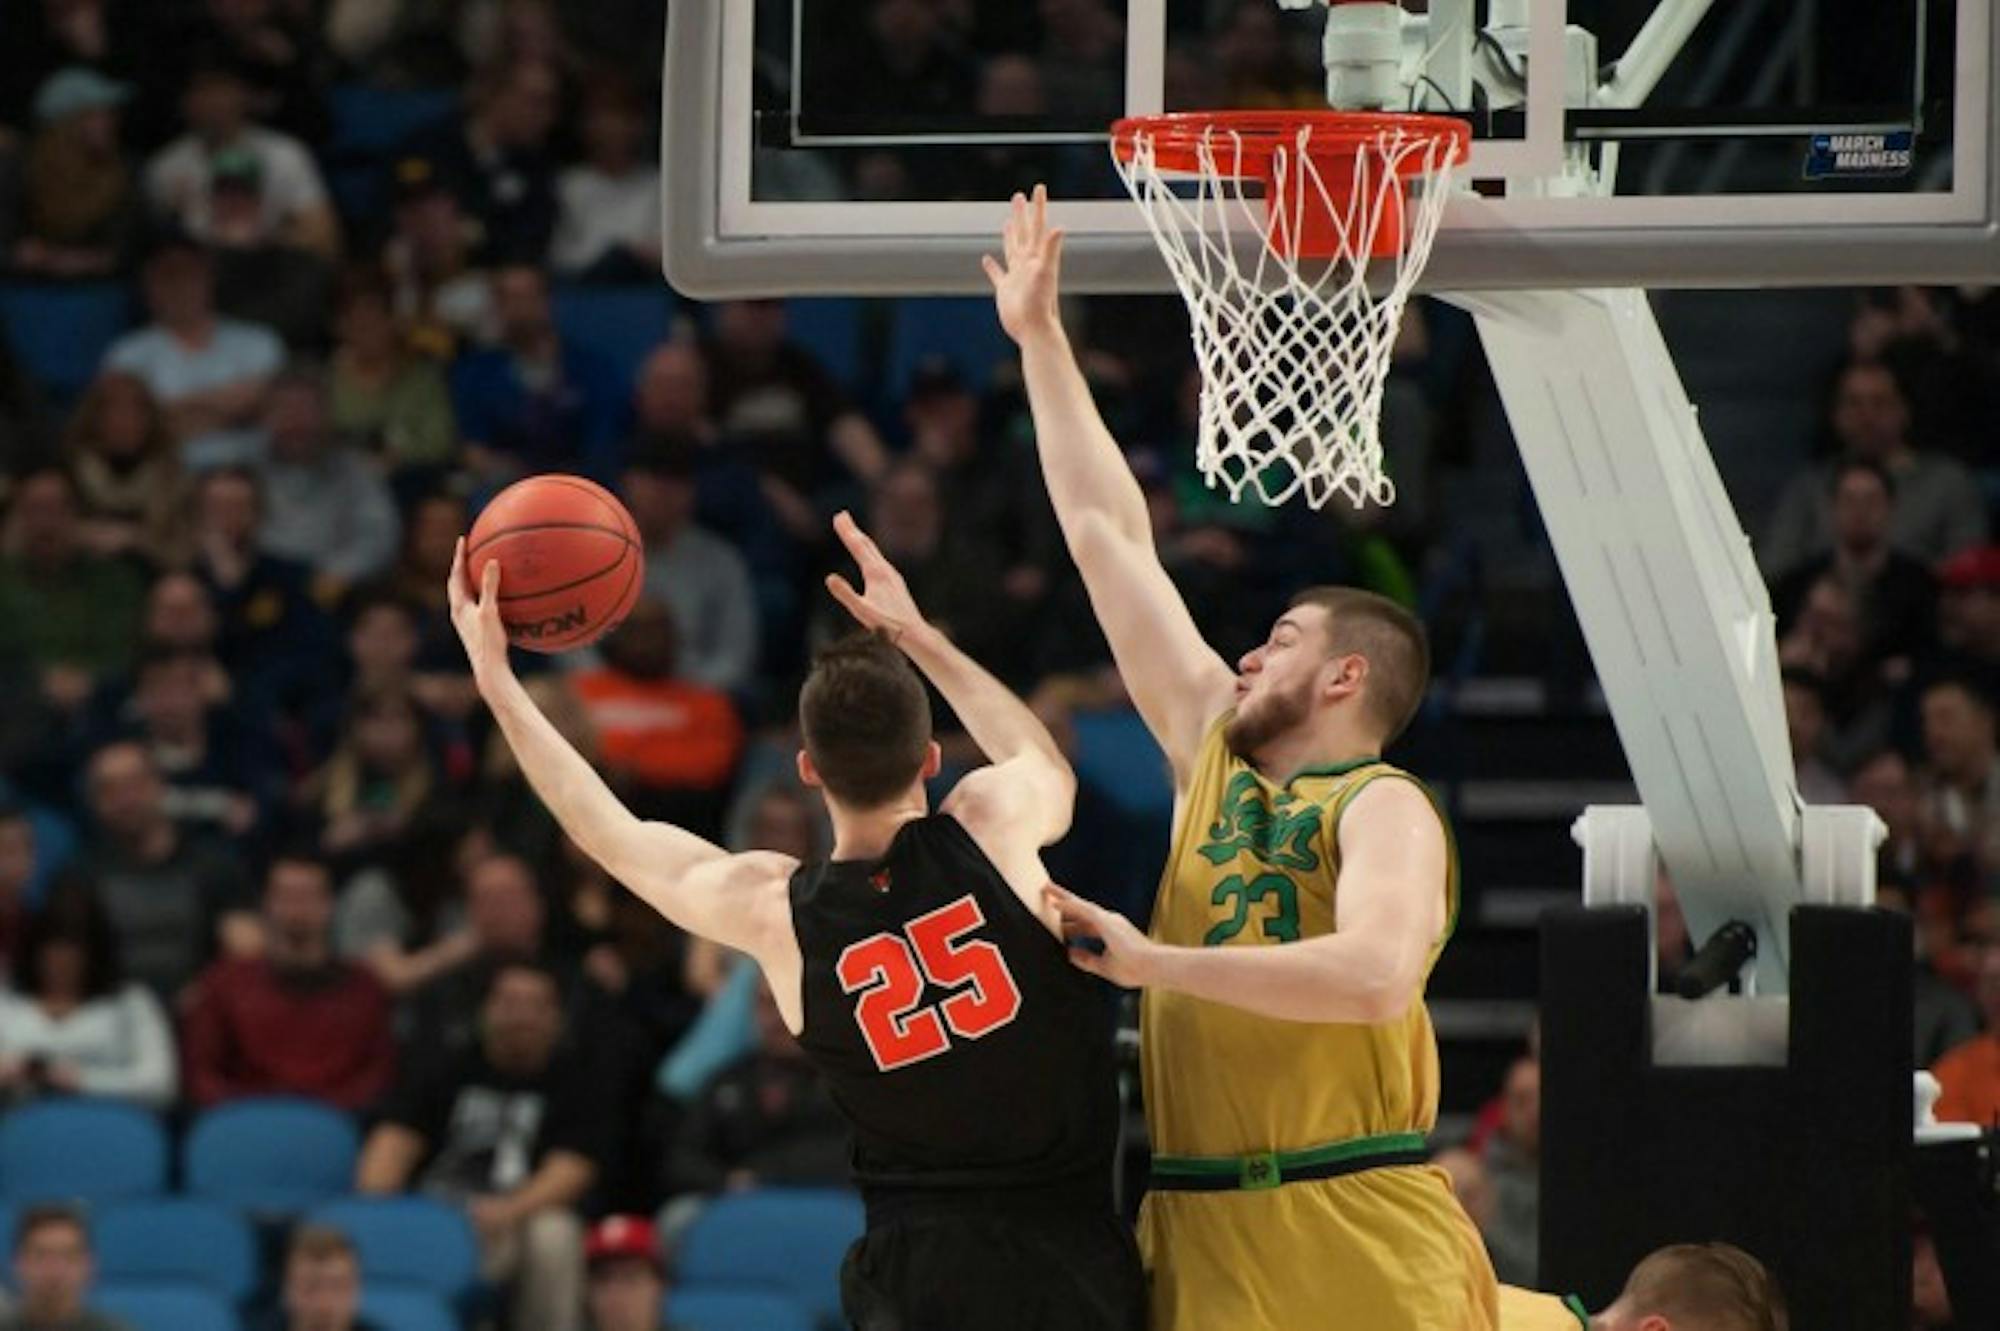 Irish junior forward Martinas Geben contests a shot during Notre Dame's 60-58 victory over Princeton on Thursday at KeyBank Arena. With the win, the Irish advance to the Round of 32 for the third straight year.